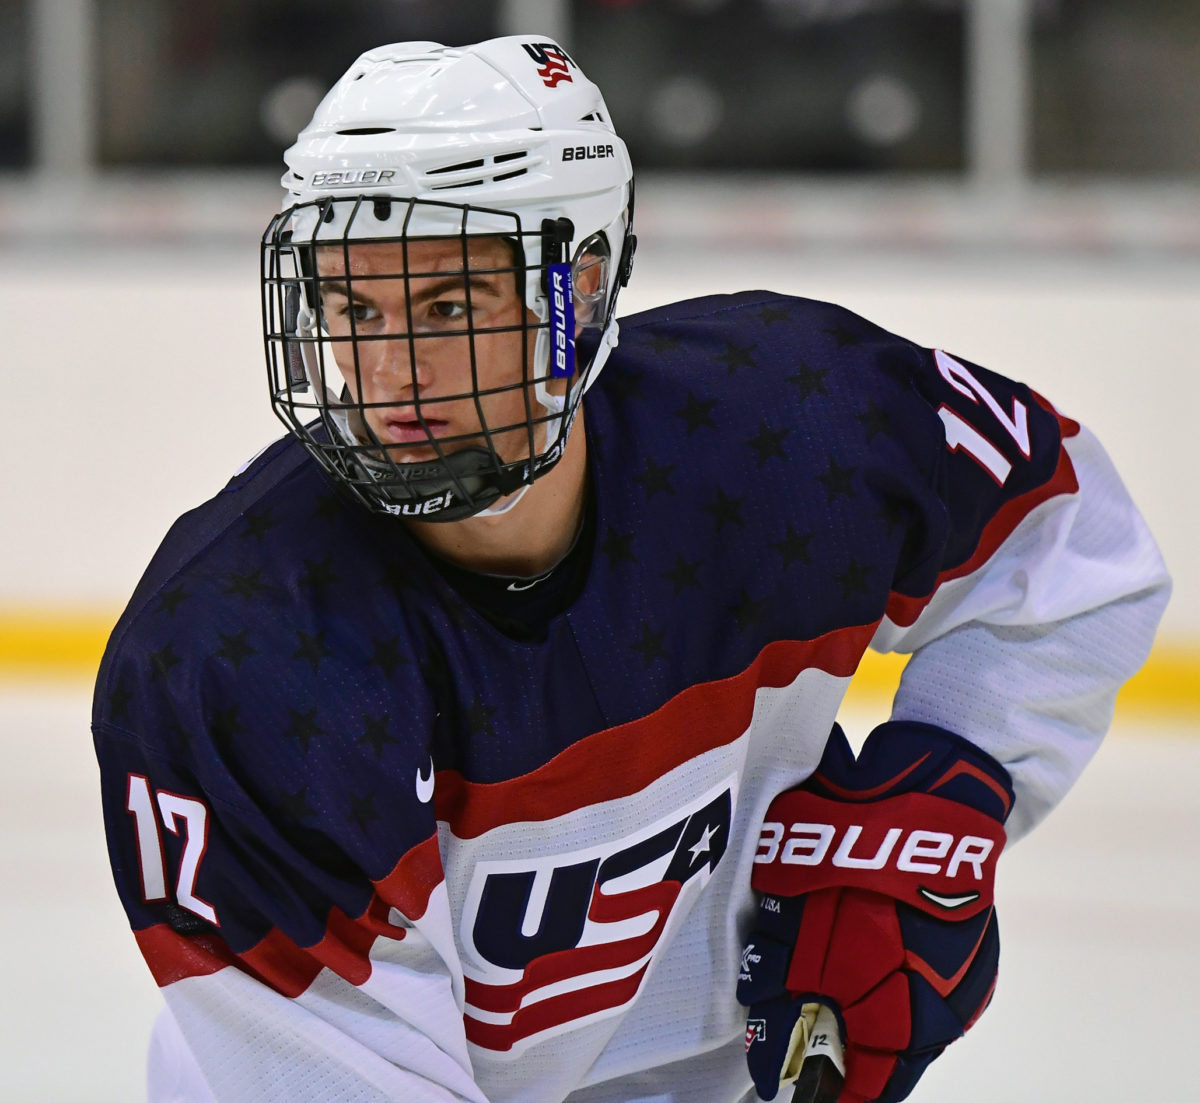 Tommy Miller of the U.S. National Development Team